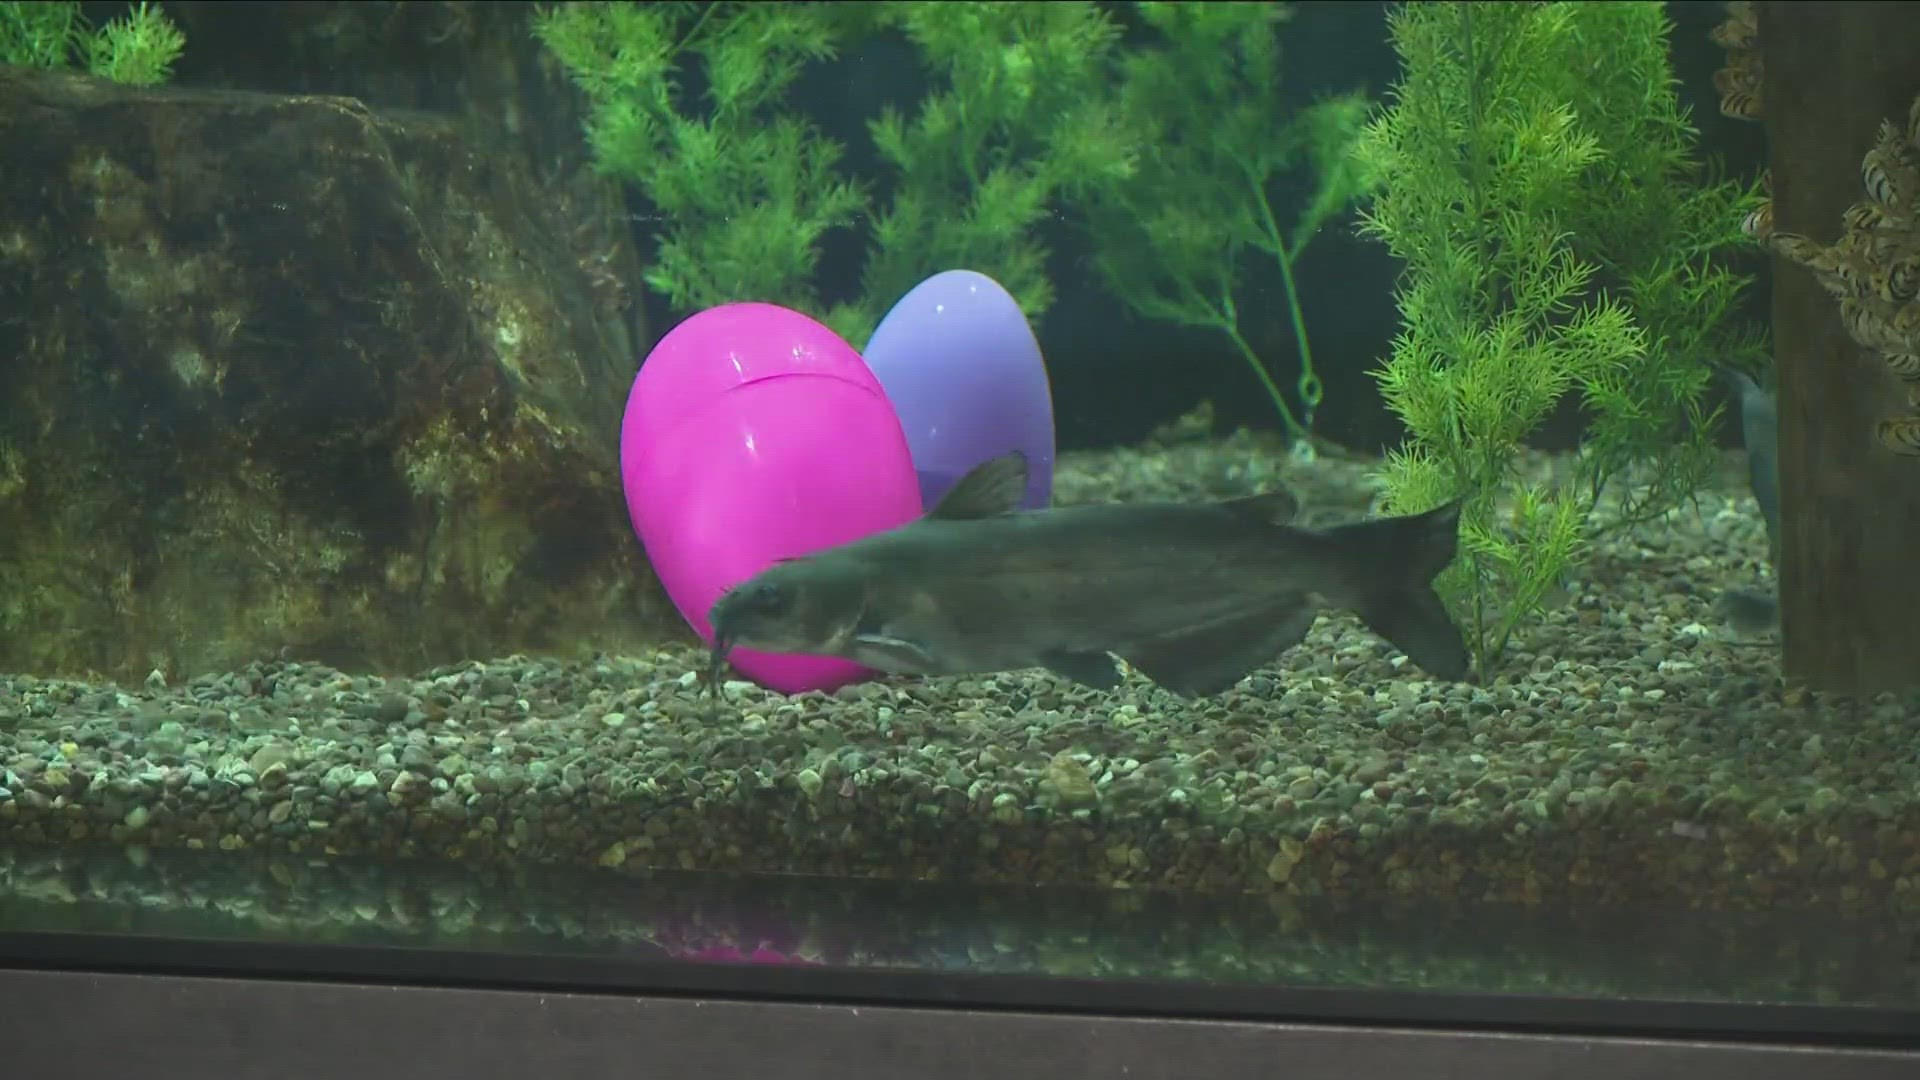 The Aquarium of Niagara is celebrating Easter this weekend with fun filled activities for all.